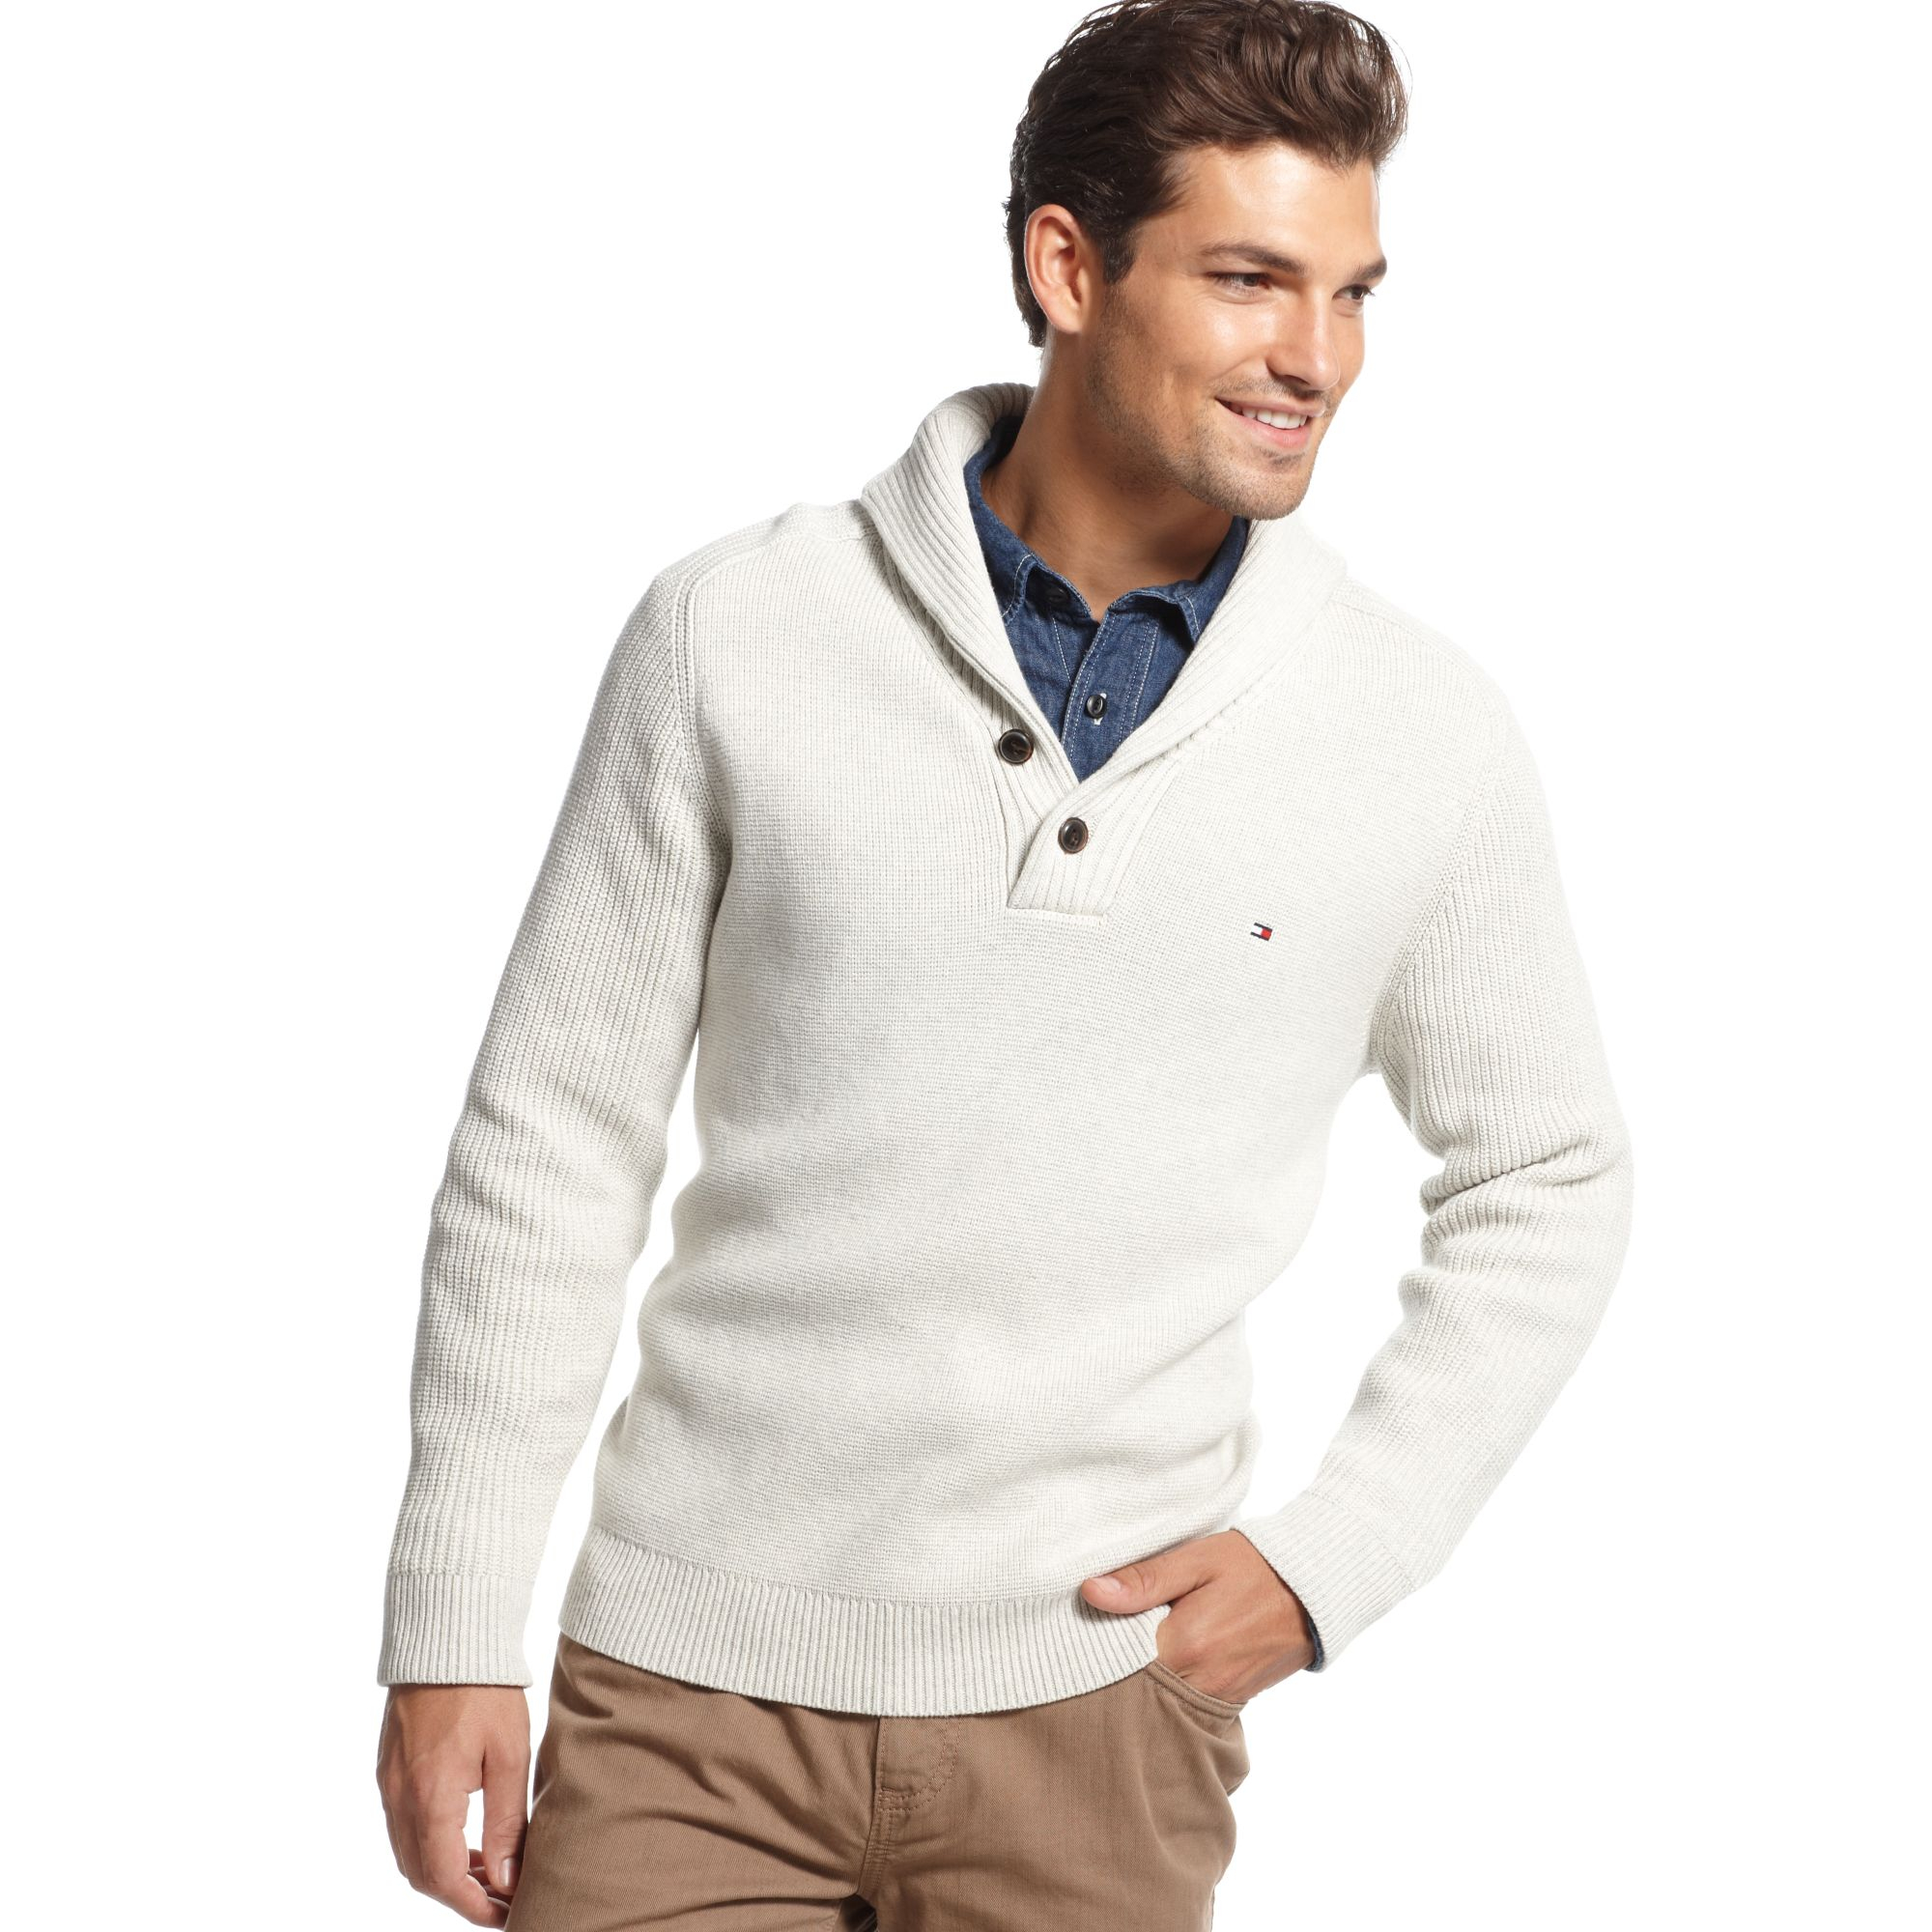 Lyst - Tommy Hilfiger Adler Shawl Collar Sweater in White for Men